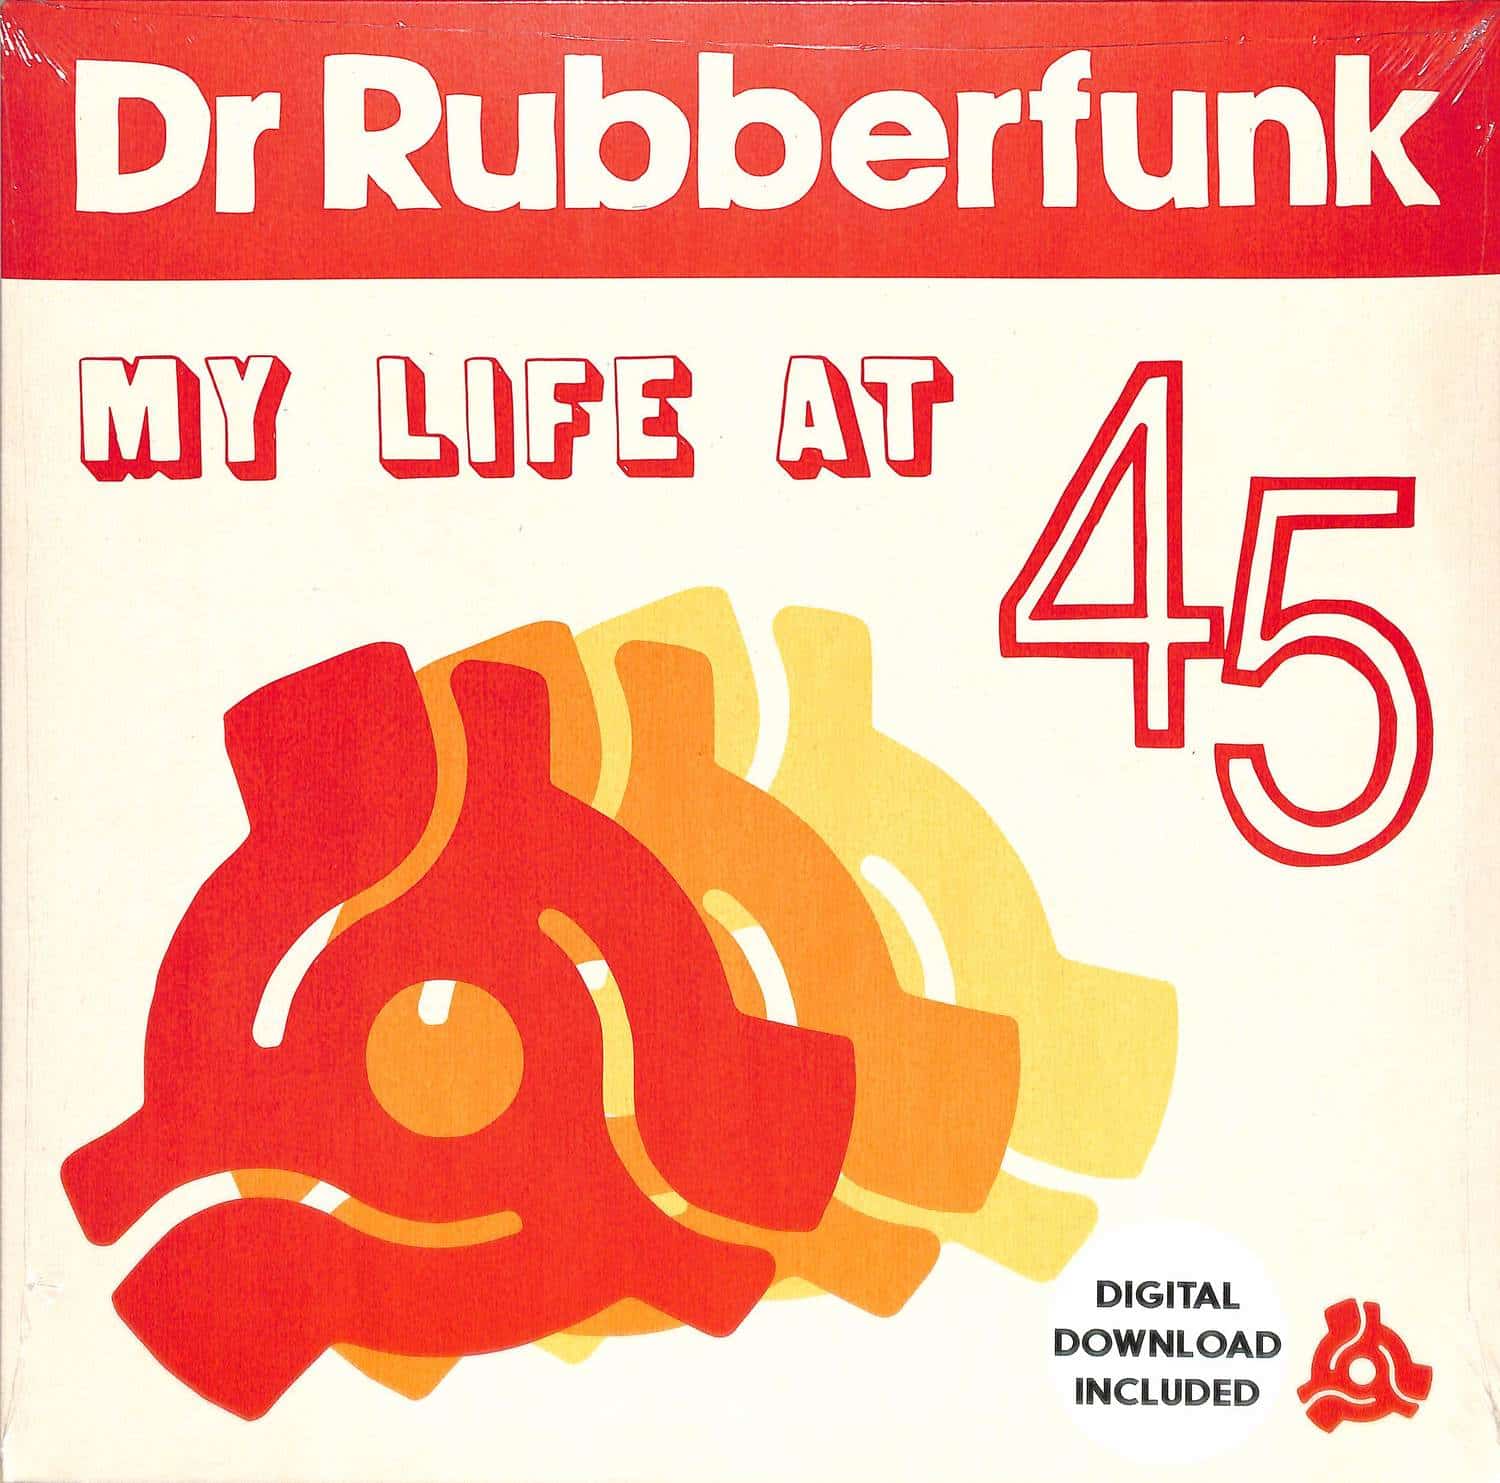 Dr Rubberfunk - MY LIFE AT 45 